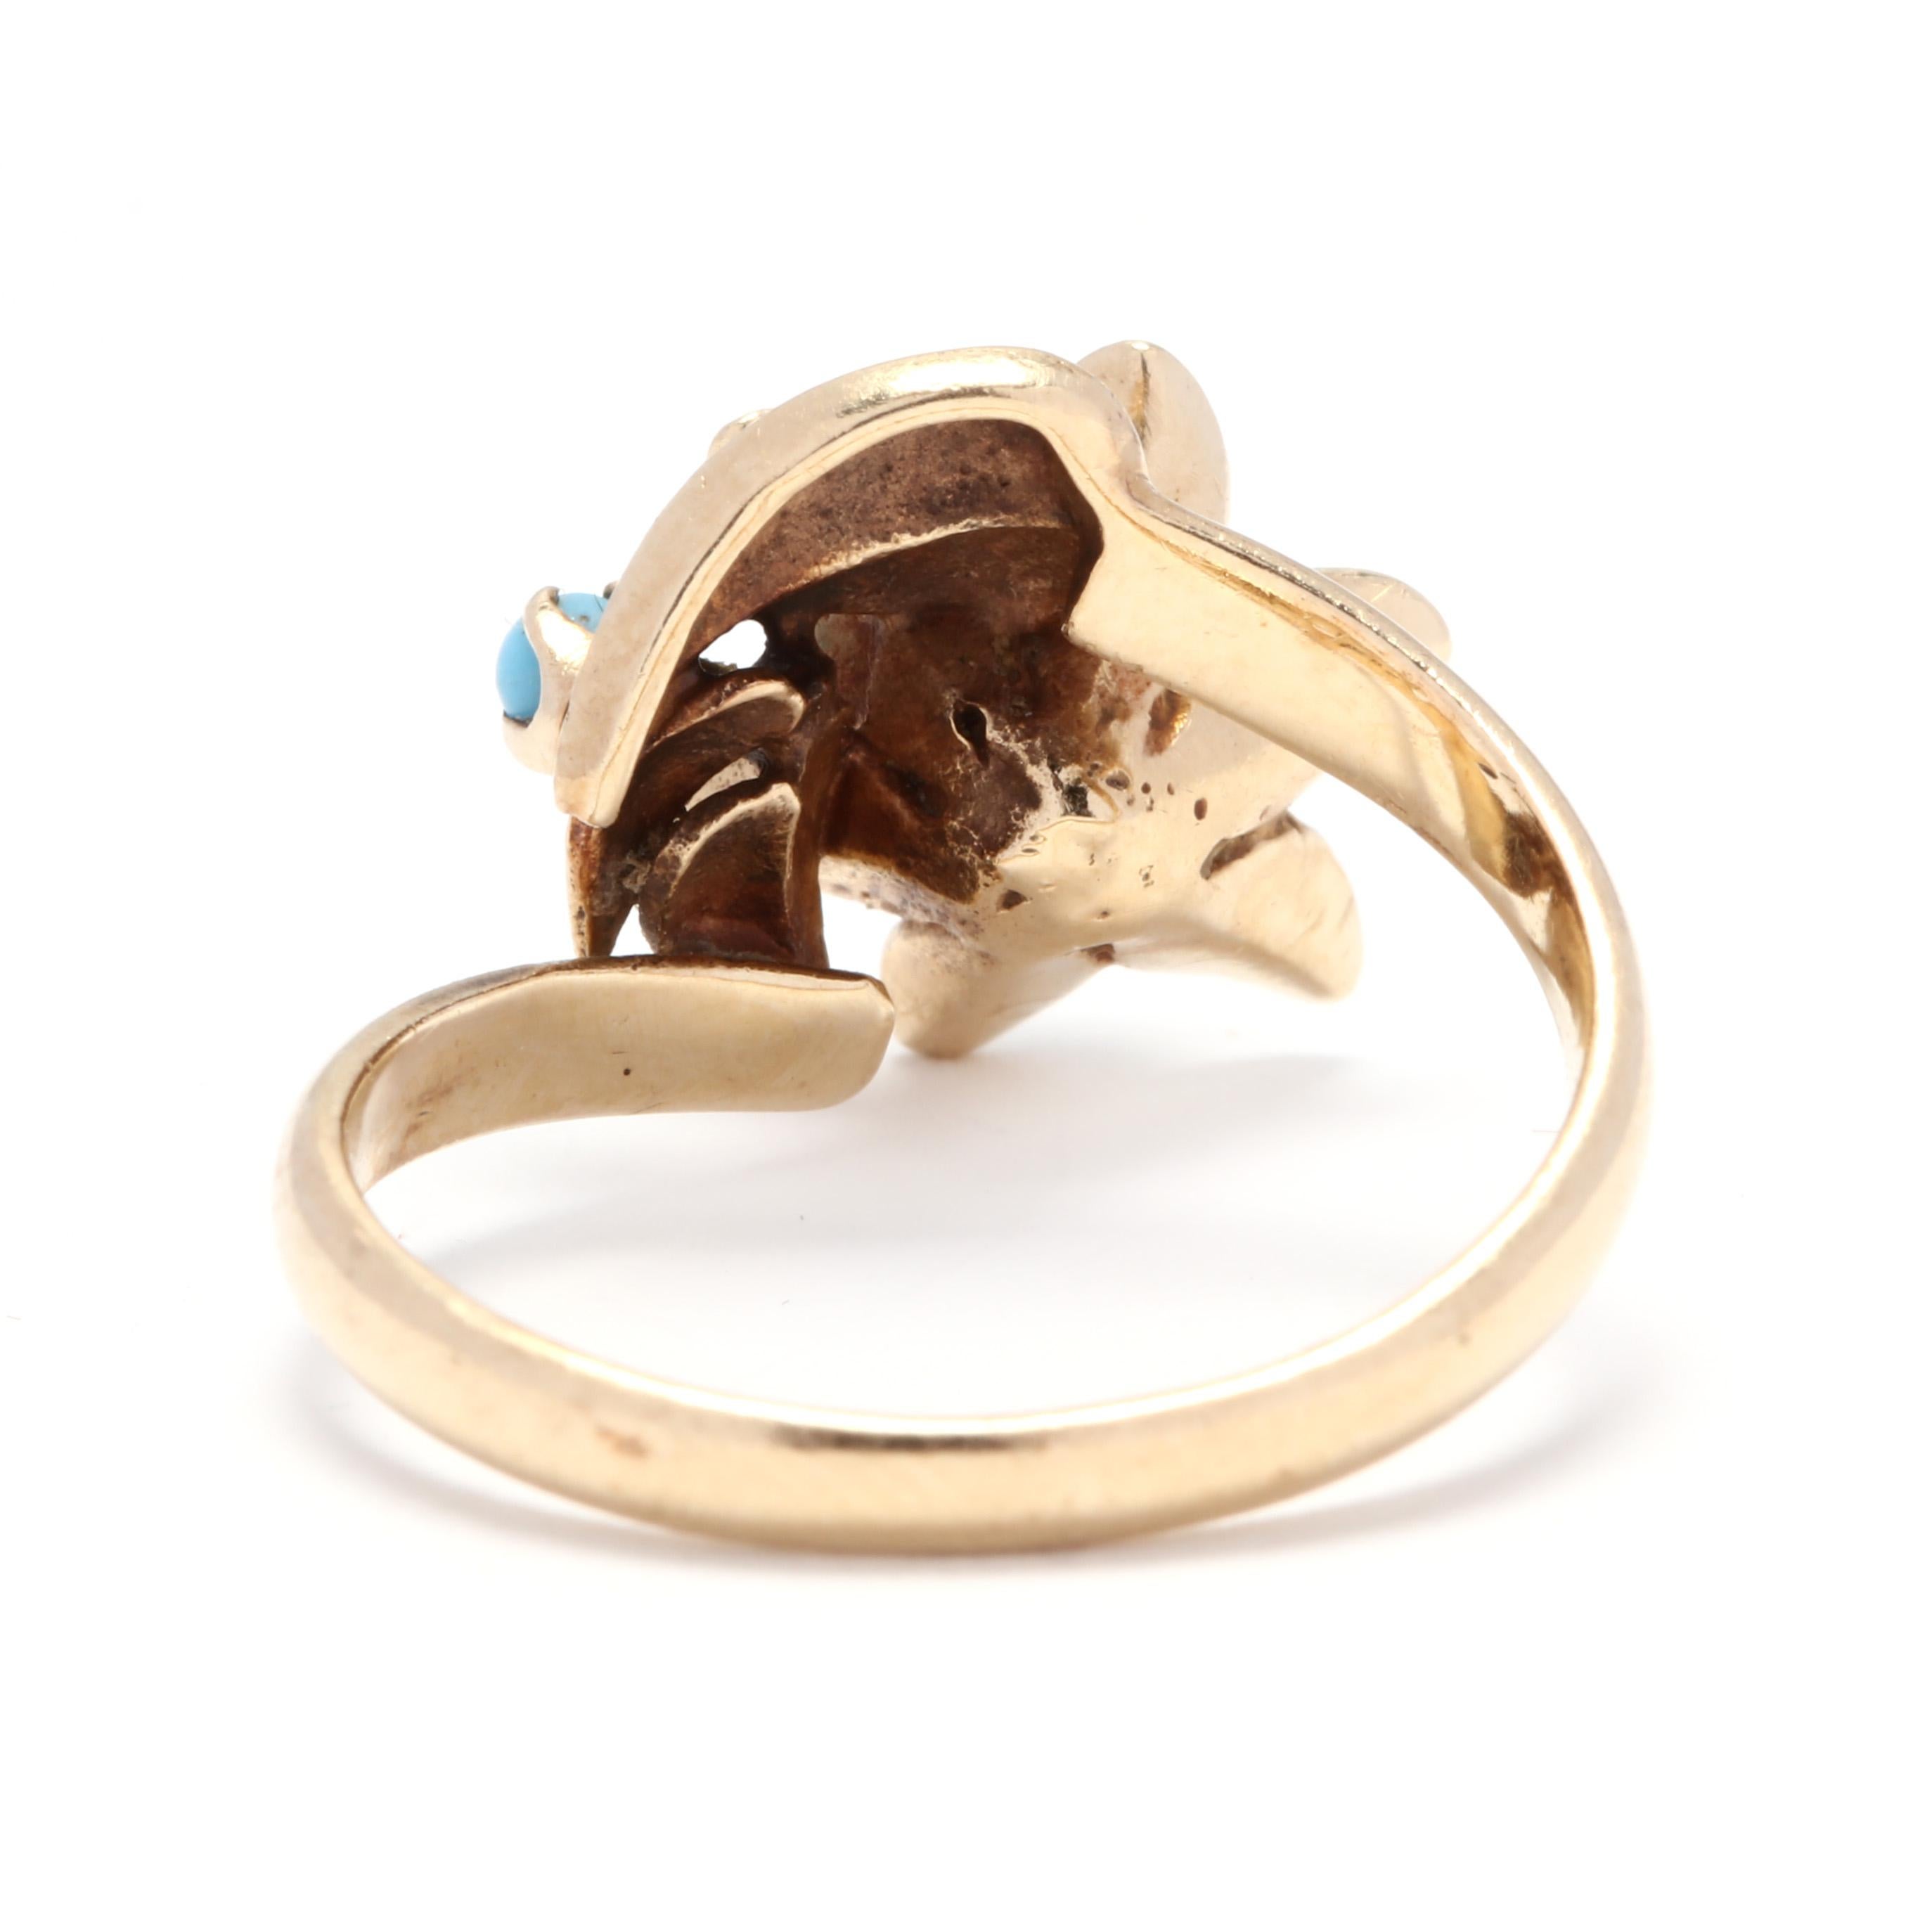 Bead 14 Karat Yellow Gold, Pearl and Turquoise Flower Bypass Ring